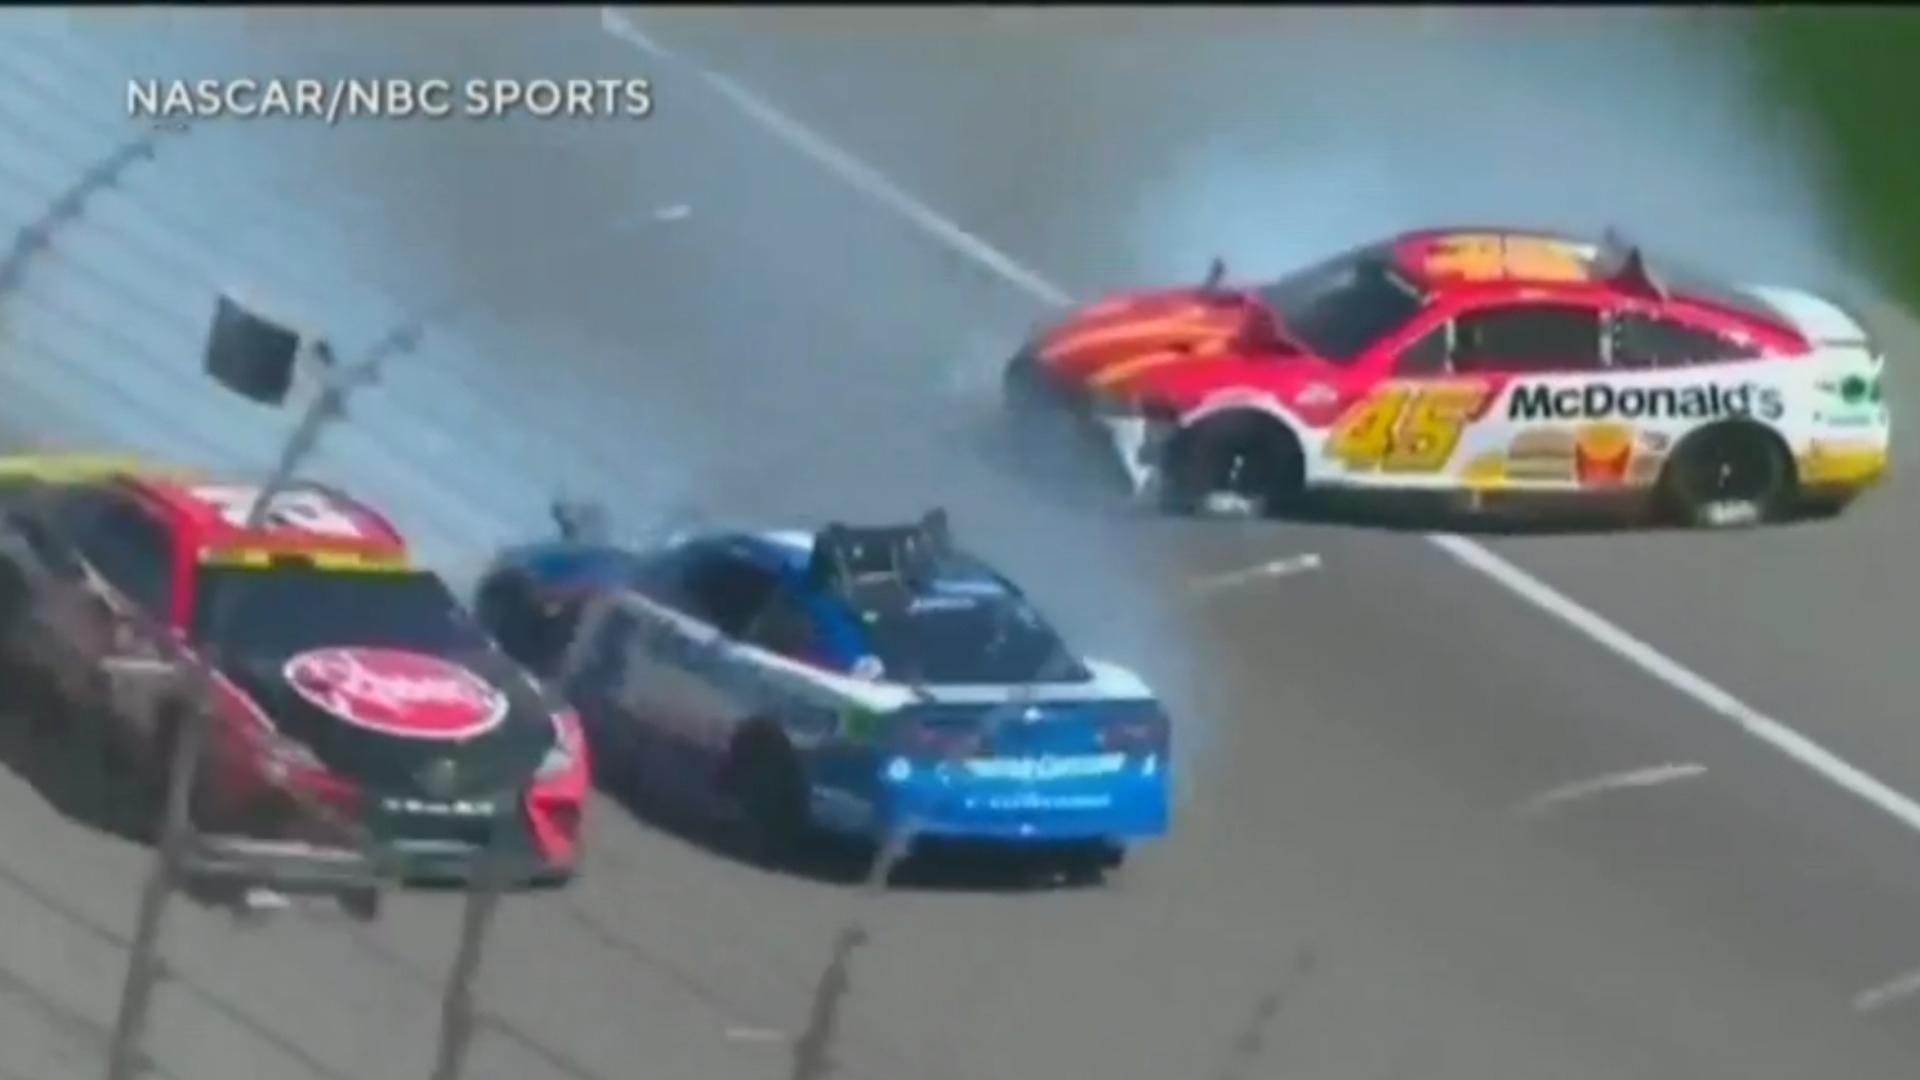 WATCH A CAR RACE FOR THE RACE; WATCH A CAR RACE FOR THE CRASHES